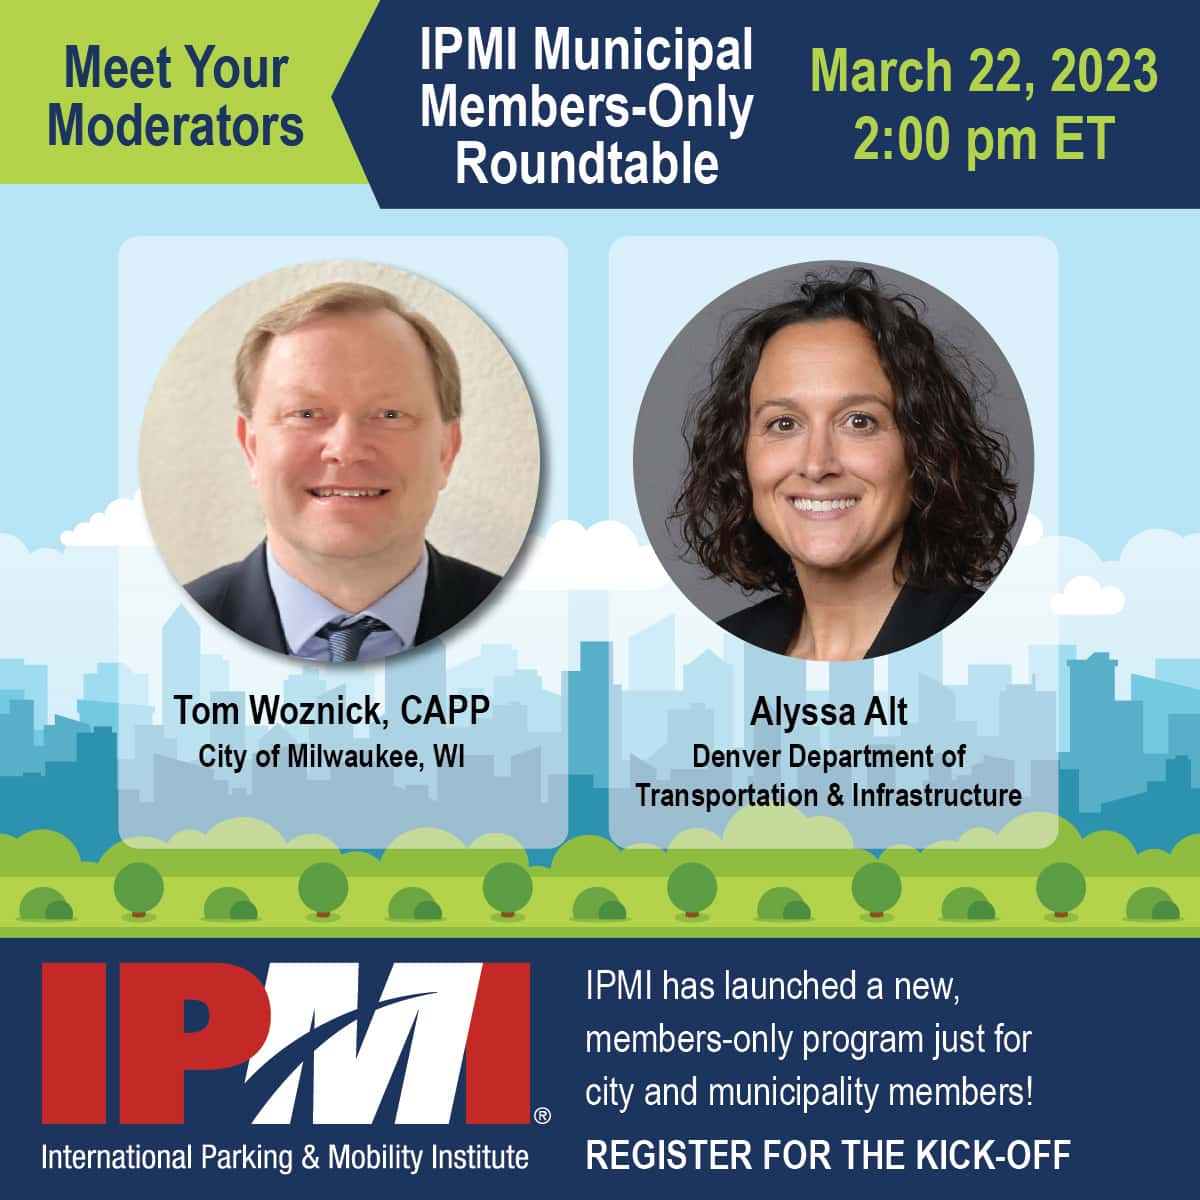 A flyer for an ipmm meeting focused on Municipal Government and Parking.